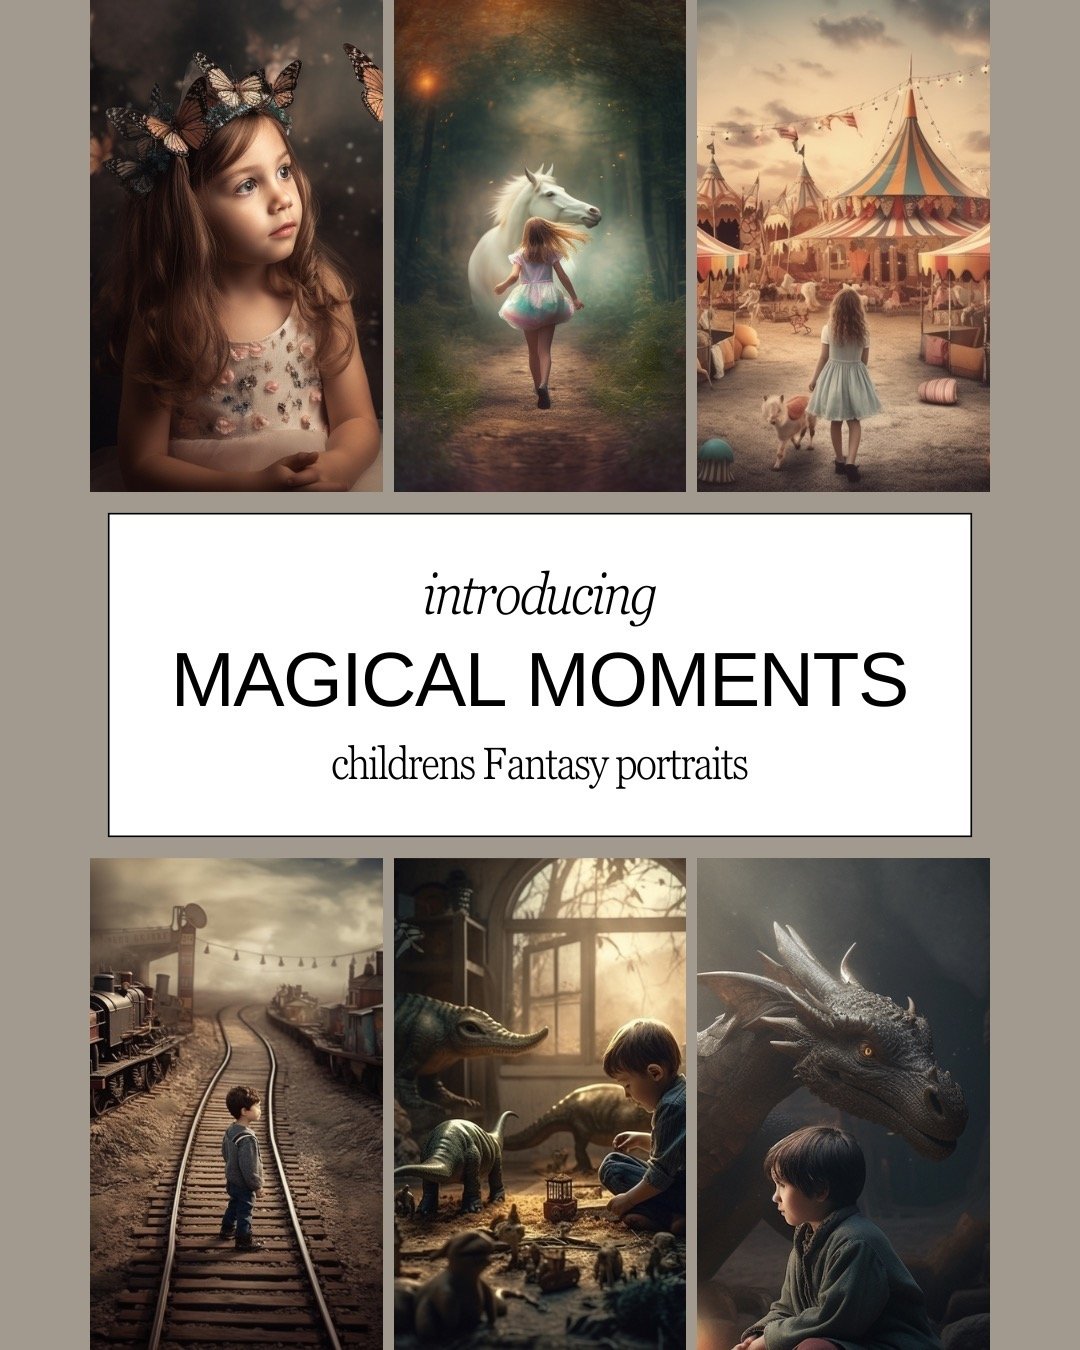 Time for something different - Magical Moments children fantasy images - weekend launch special pricing...

I have been photographing children since I was 19 years old. As a professional it&rsquo;s been 25 years professional photographing children an